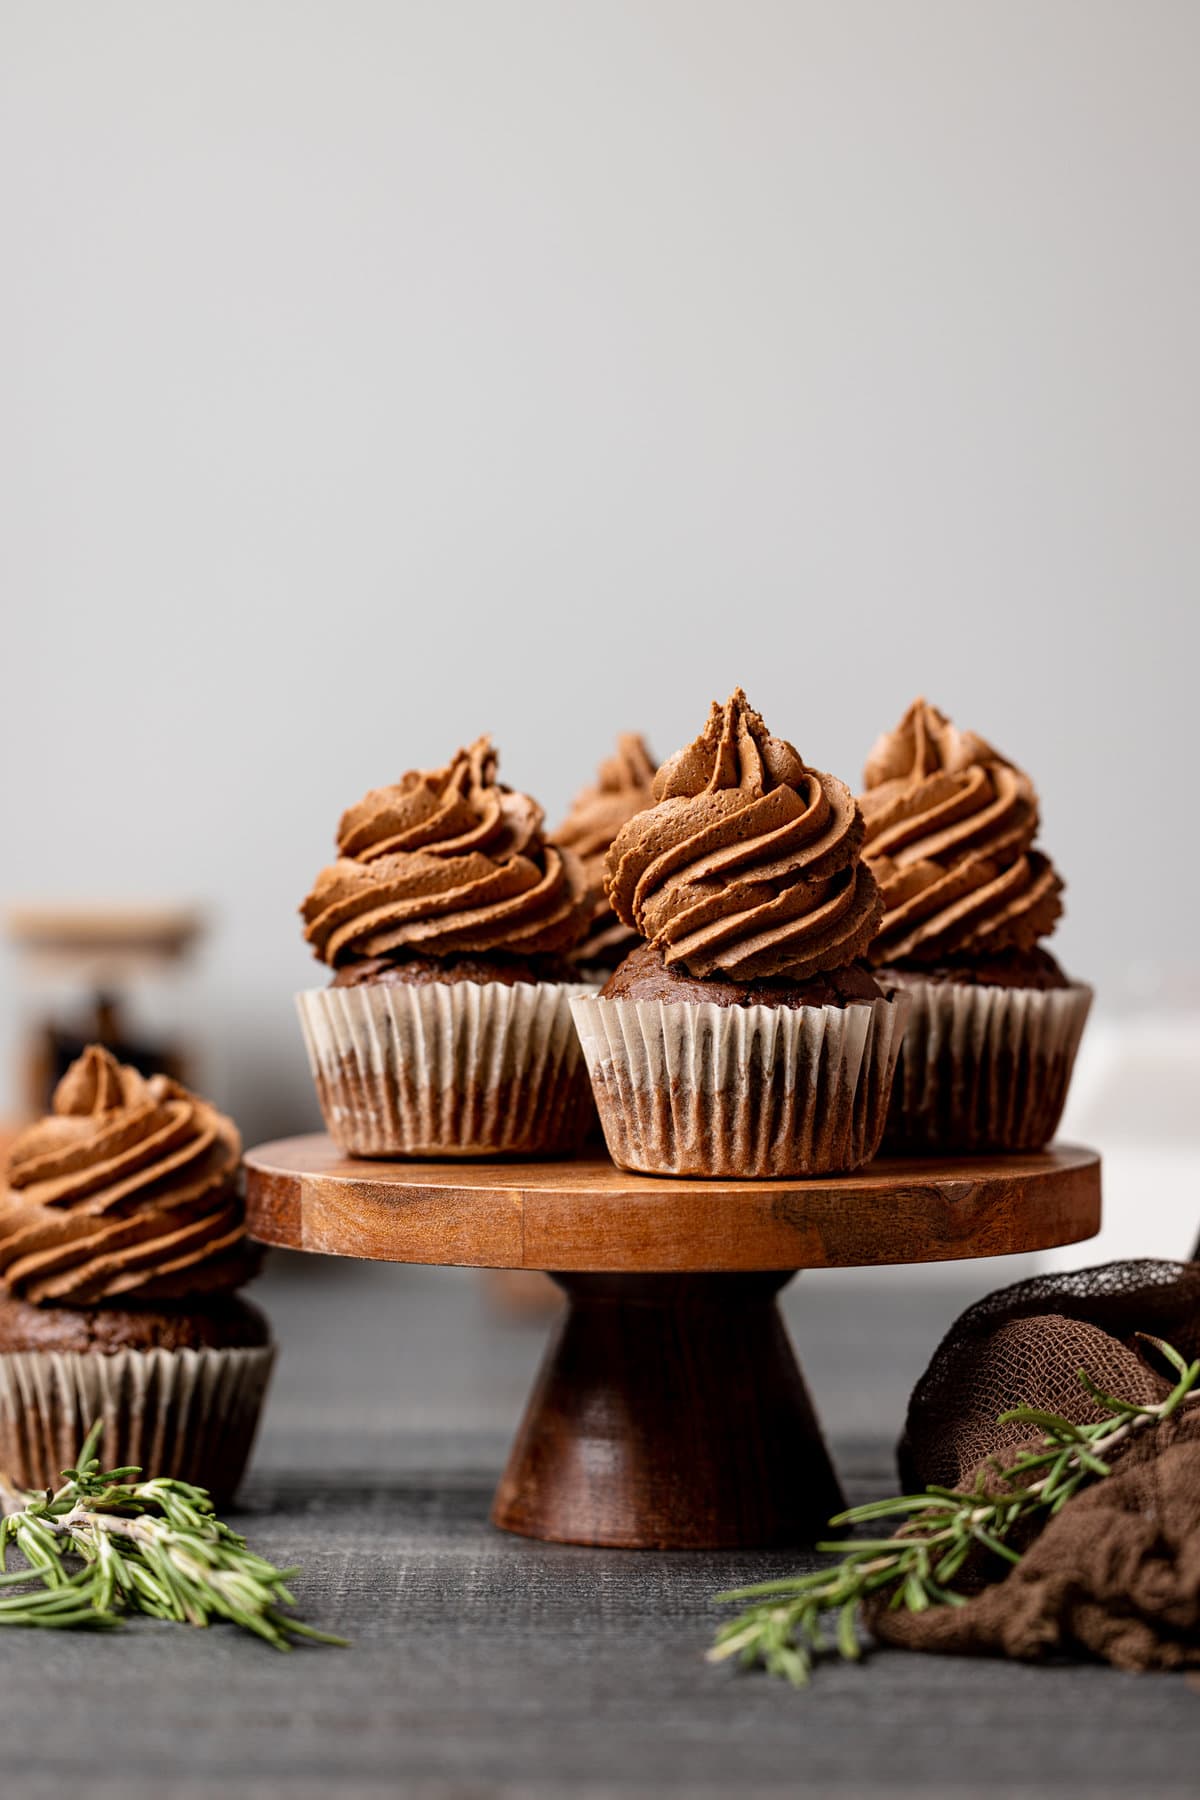 Wooden serving platter of Chocolate Sweet Potato Cupcakes